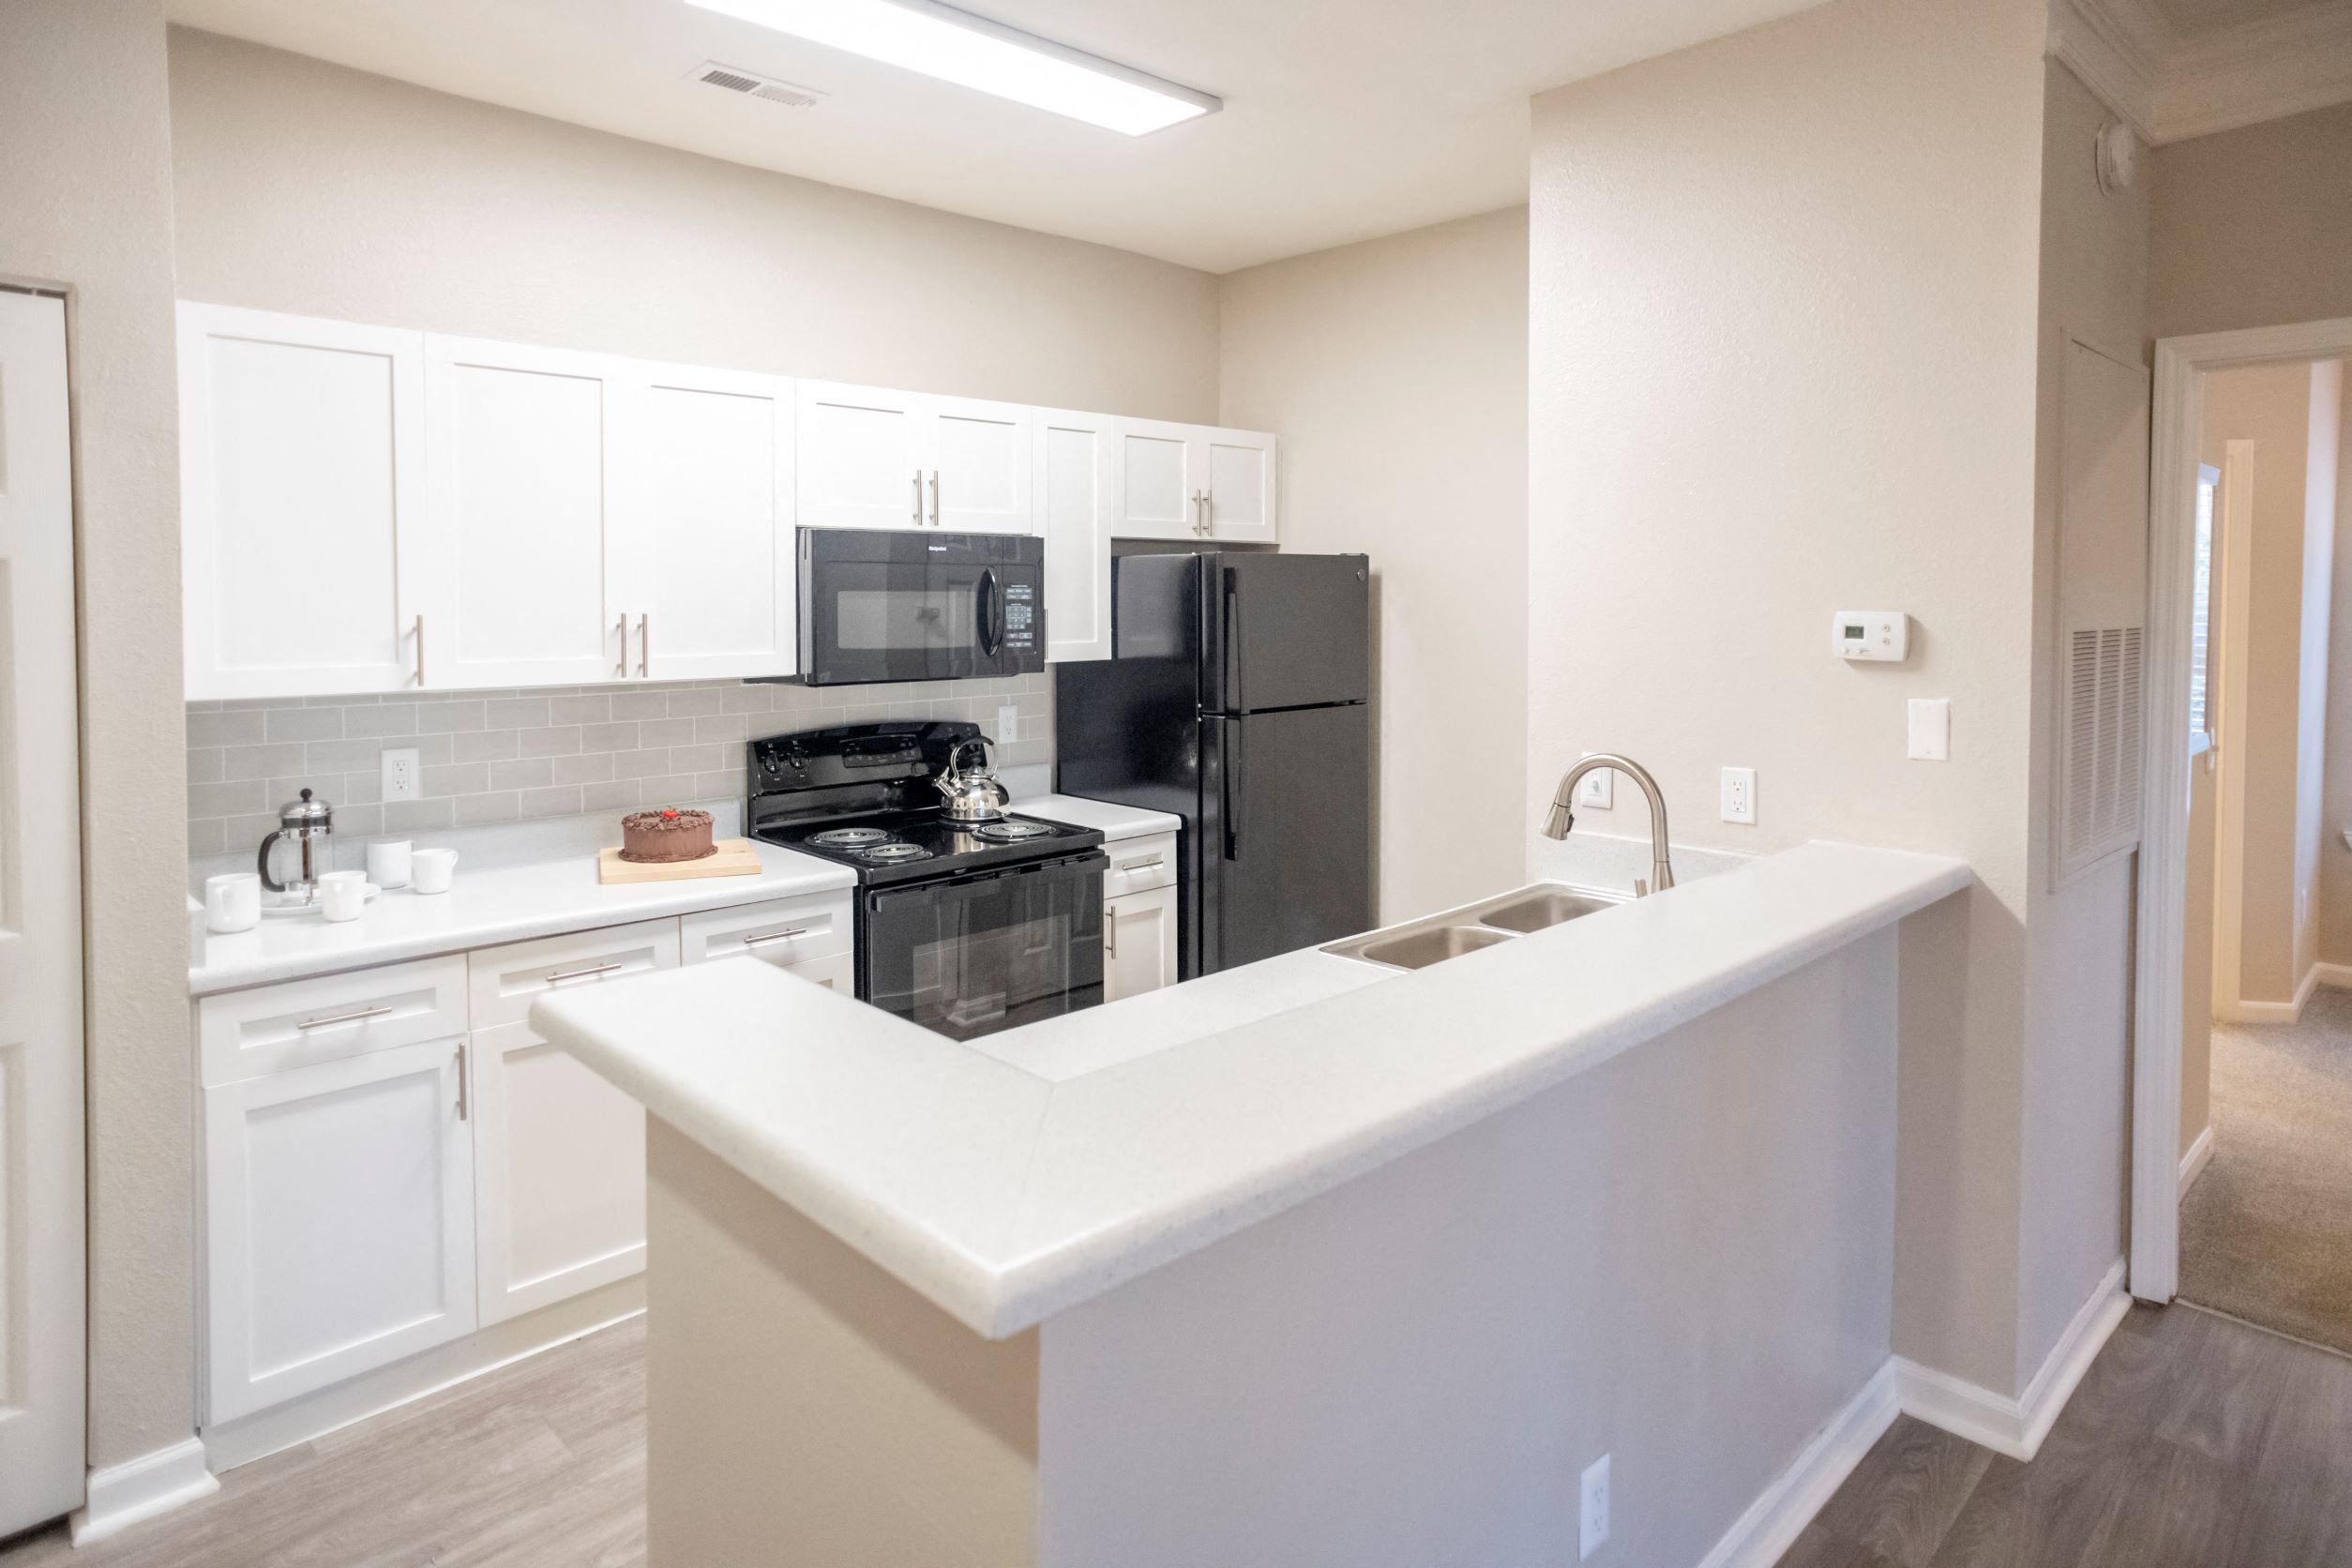 White Cabinetry and Black Appliances Kitchen with Breakfast Barat Polos at Hudson Corners Apartments, South Carolina 29650